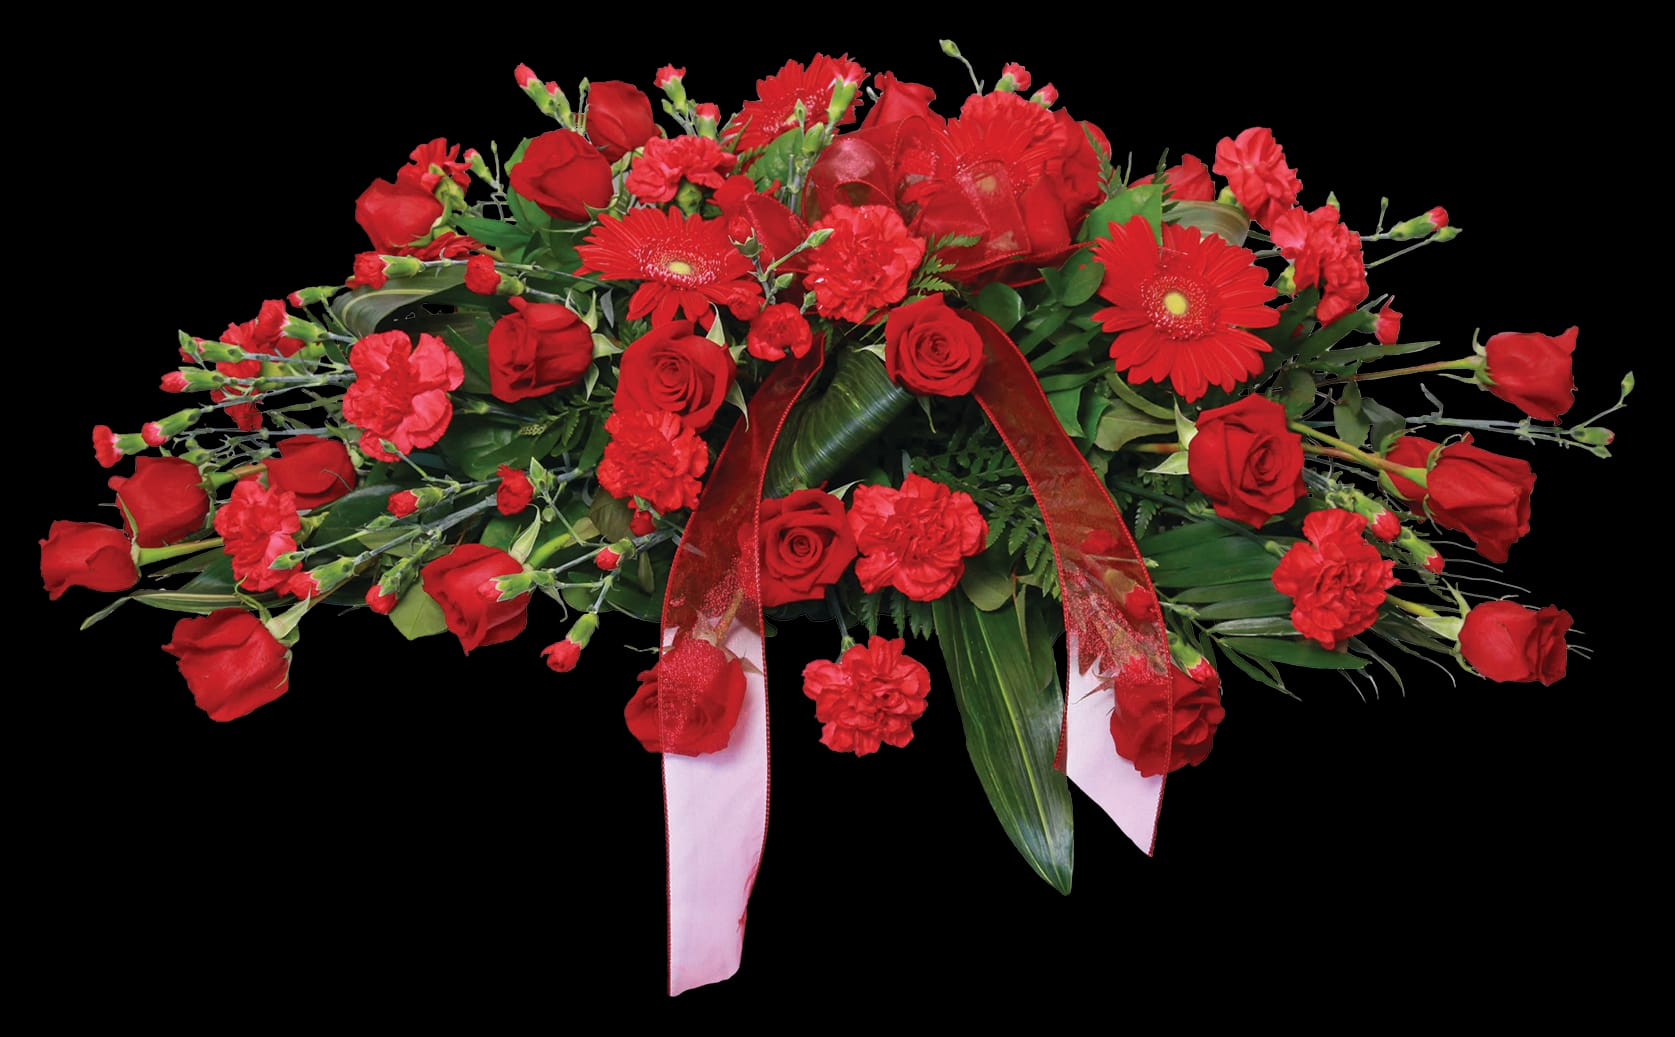 A casket spray with red roses, gerberas, carnations and greens.